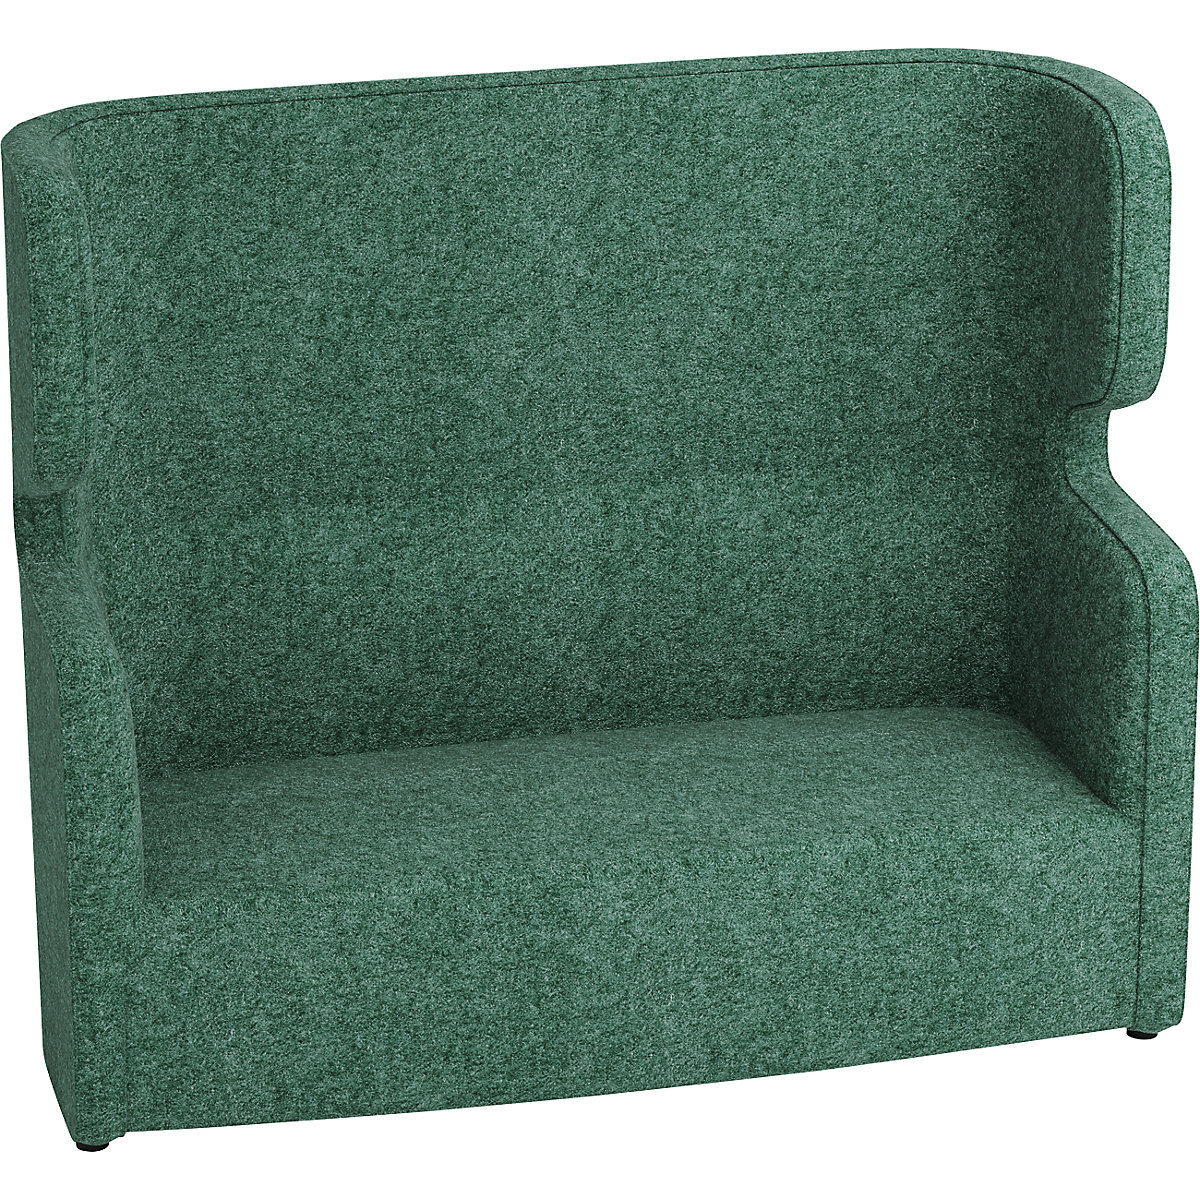 VIVO acoustic sofa – BISLEY, two-seater with high back rest, turquoise